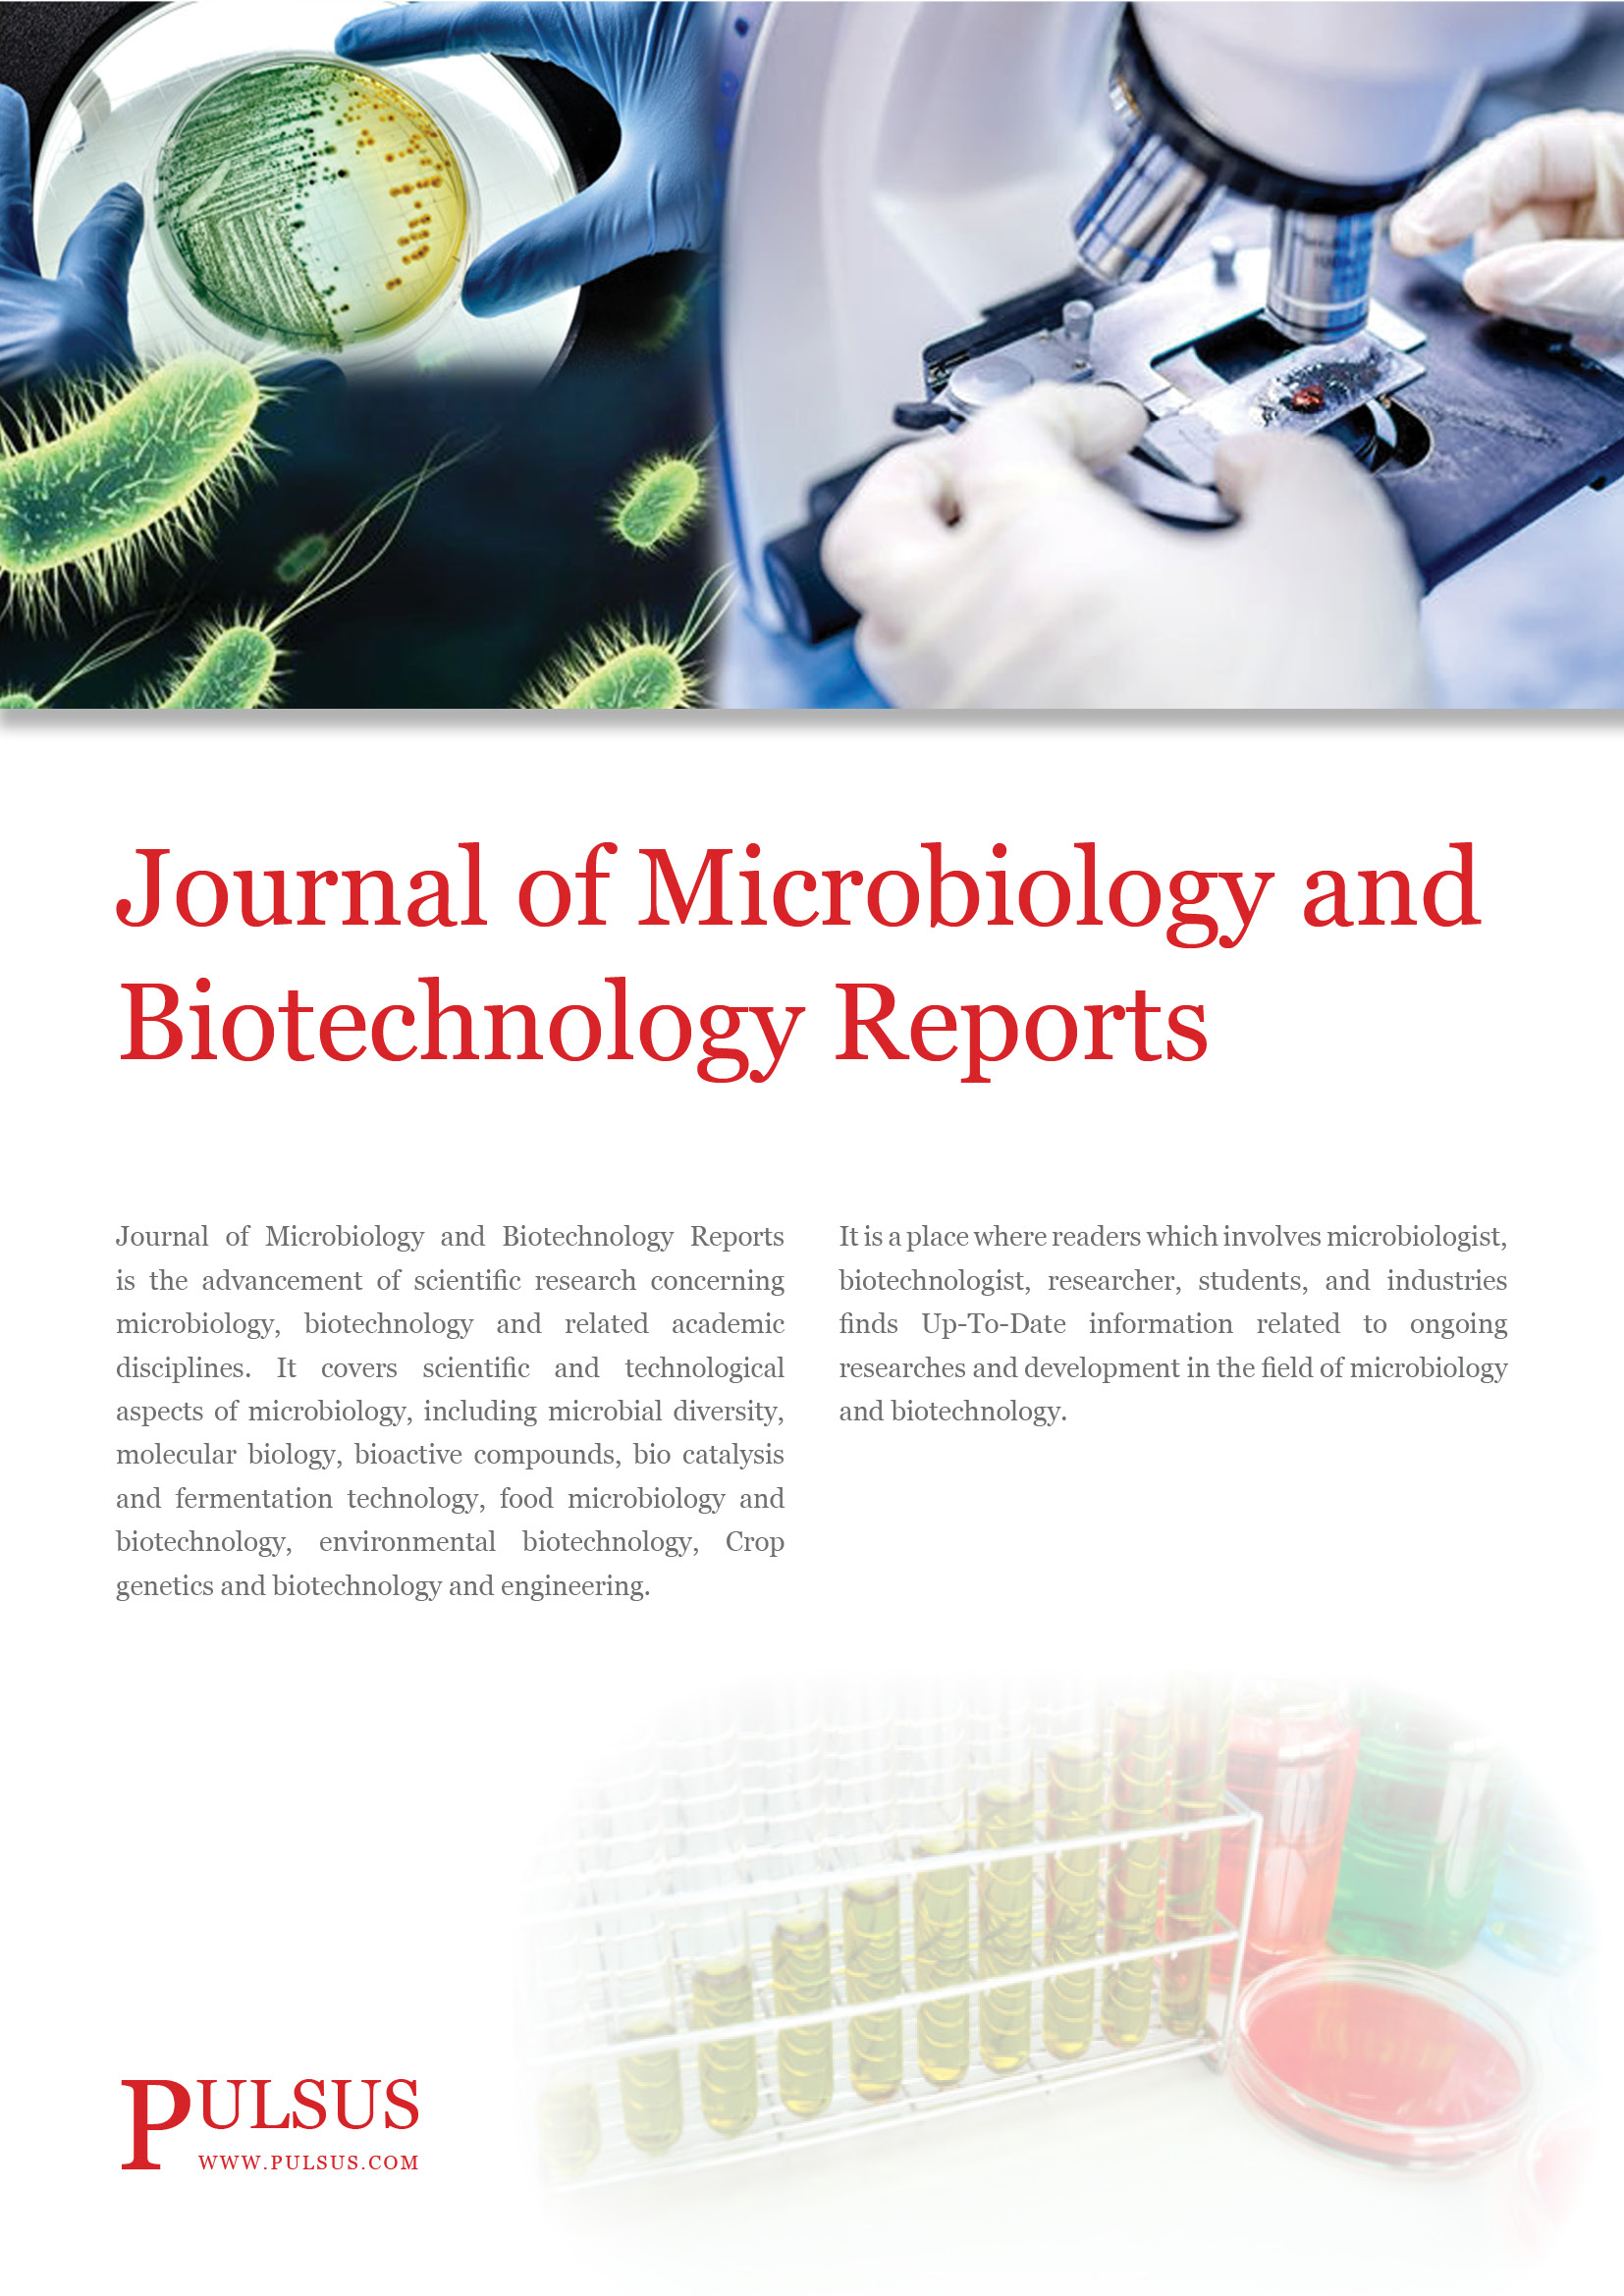 Journal of Microbiology and Biotechnology Reports